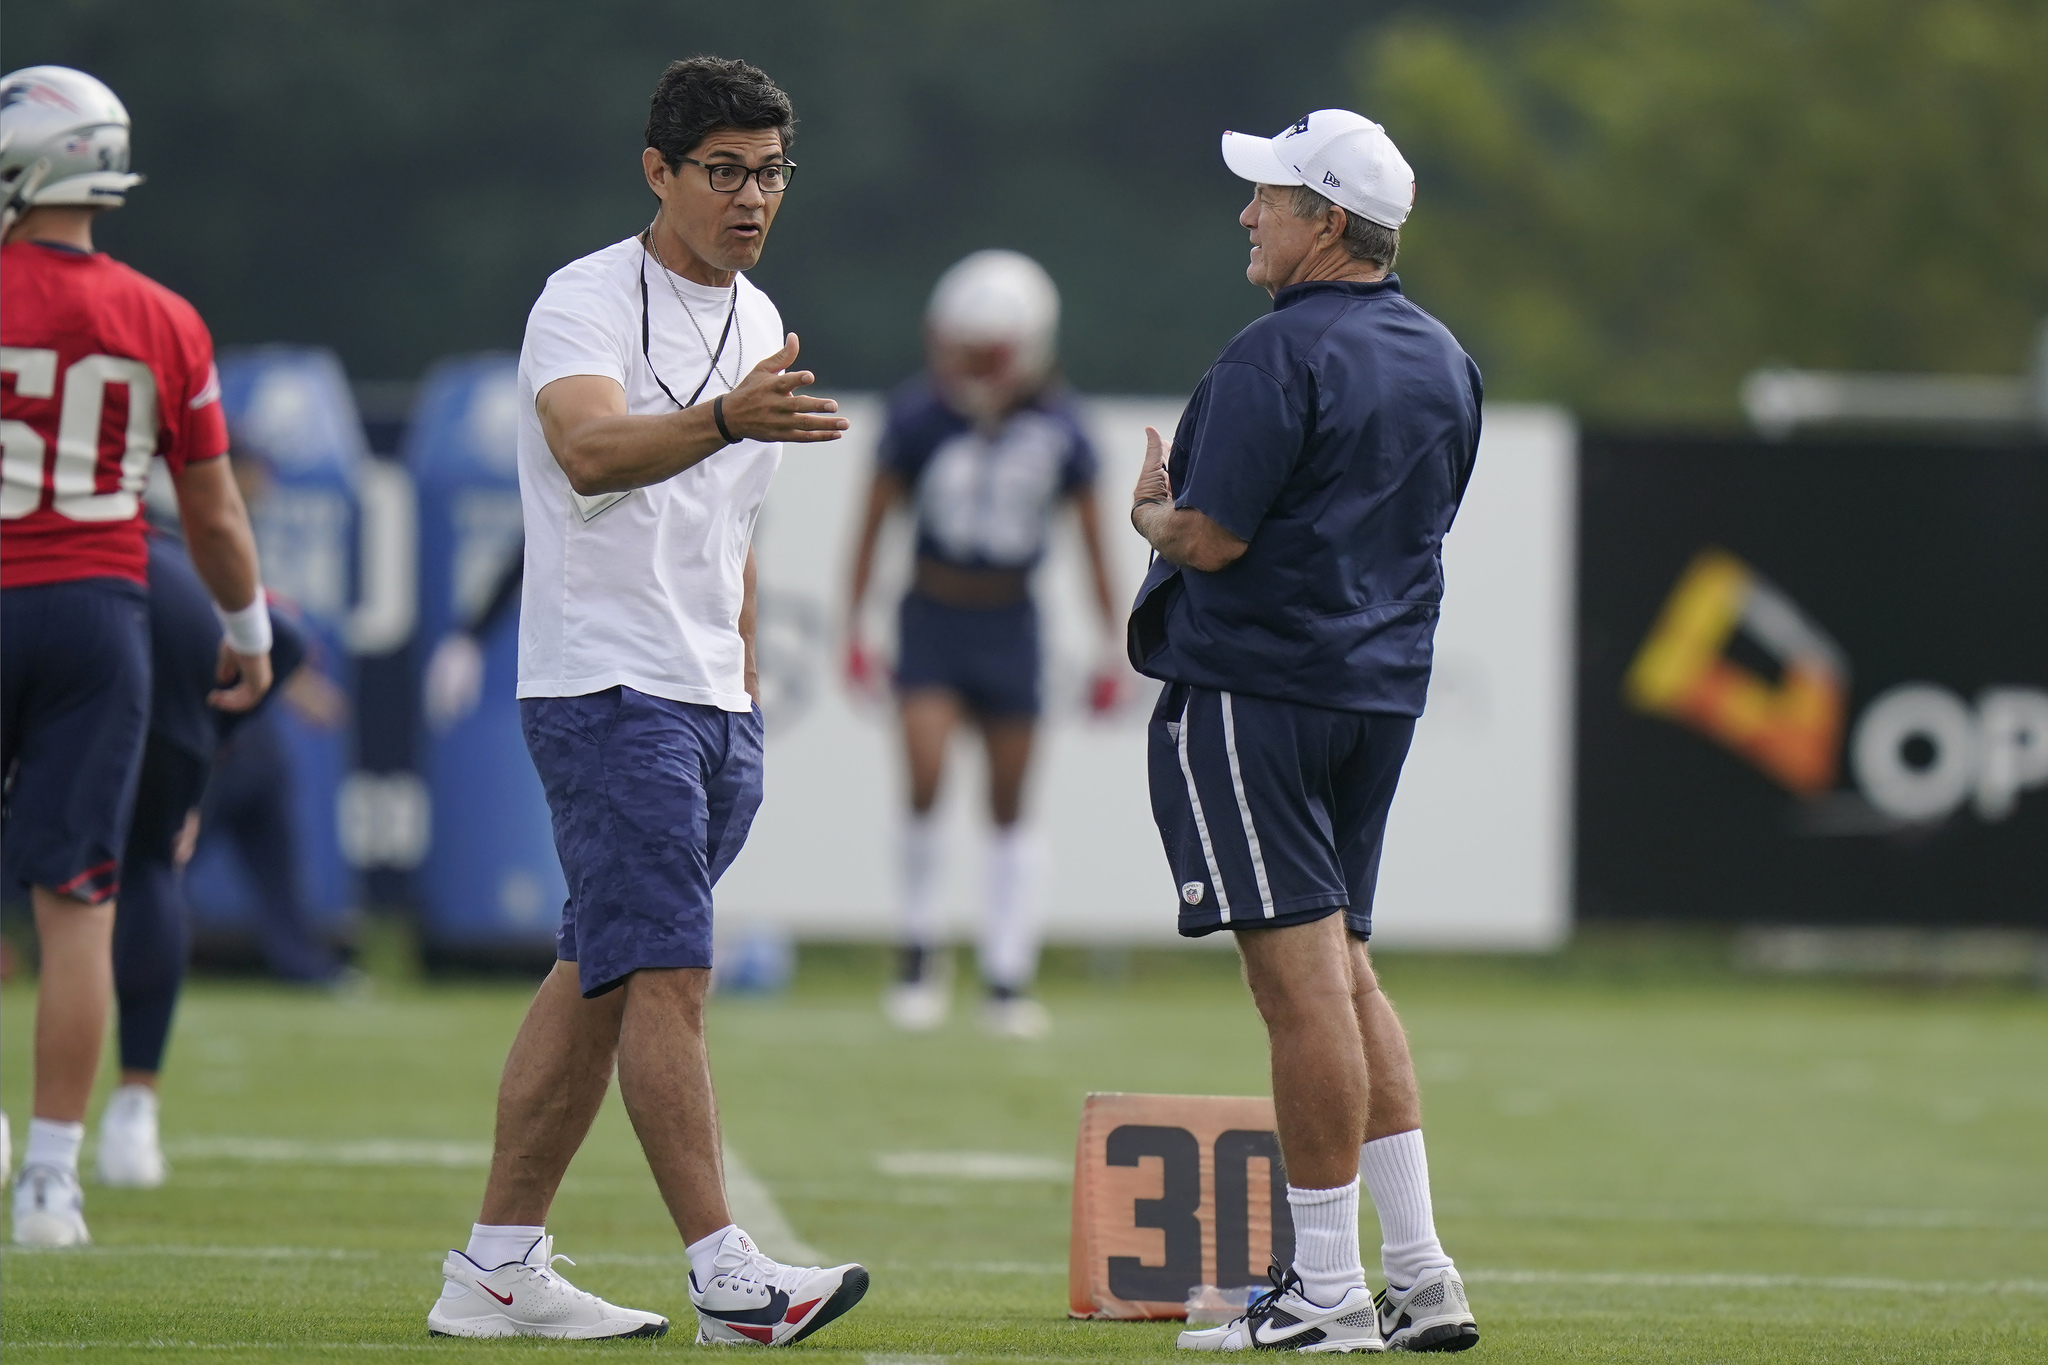 Former New England Patriots football player Tedy Bruschi, left, speaks with Patriots head coach Bill Belichick